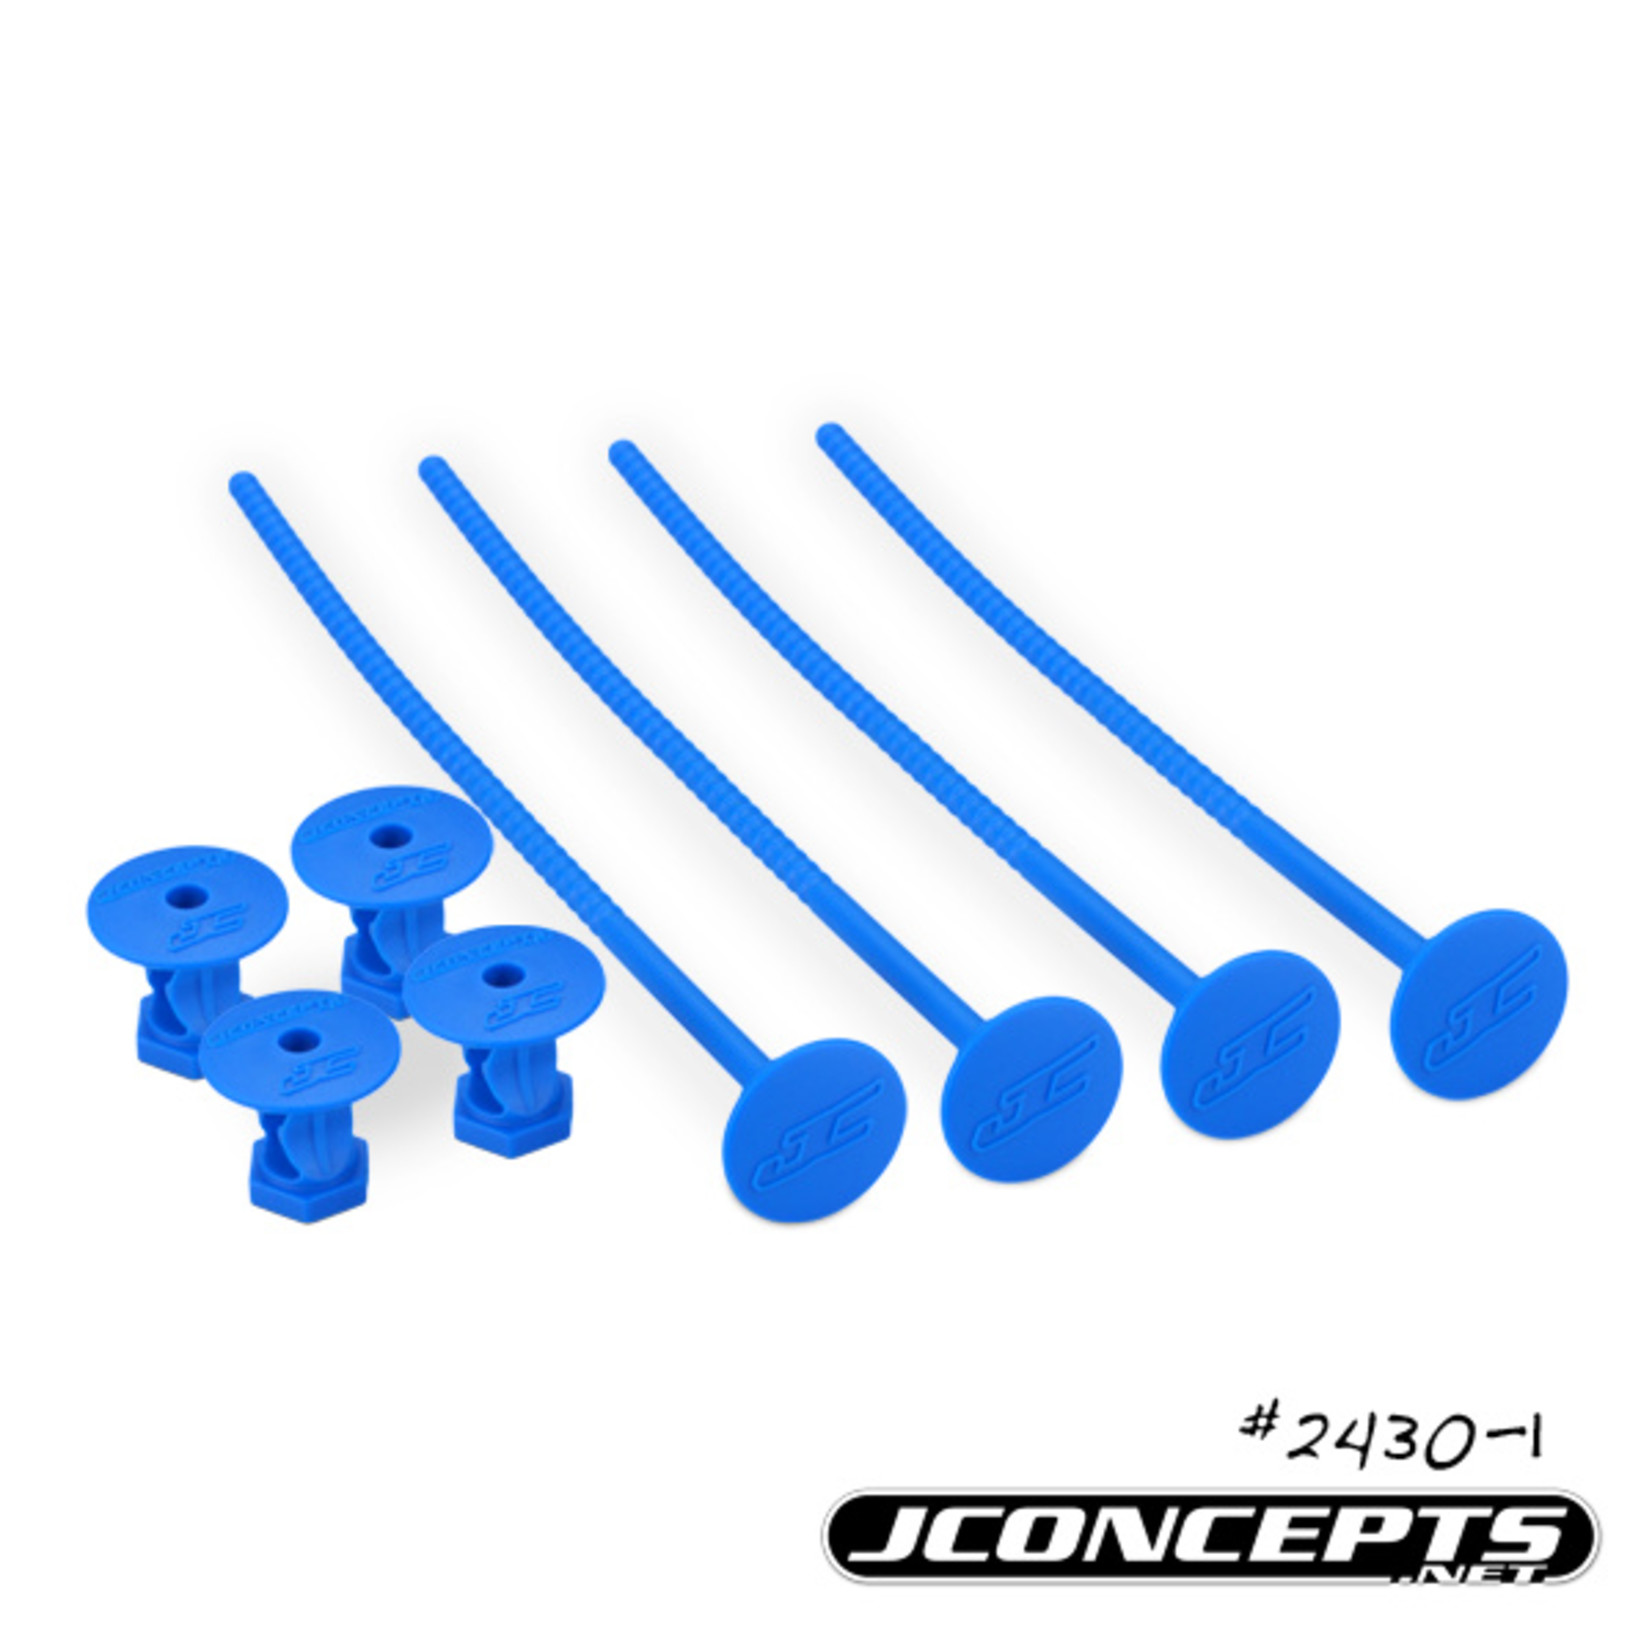 J Concepts JCO24301 - 1/10th Off-Road Tire Stick, Holds 4 Mounted Tires, Blue